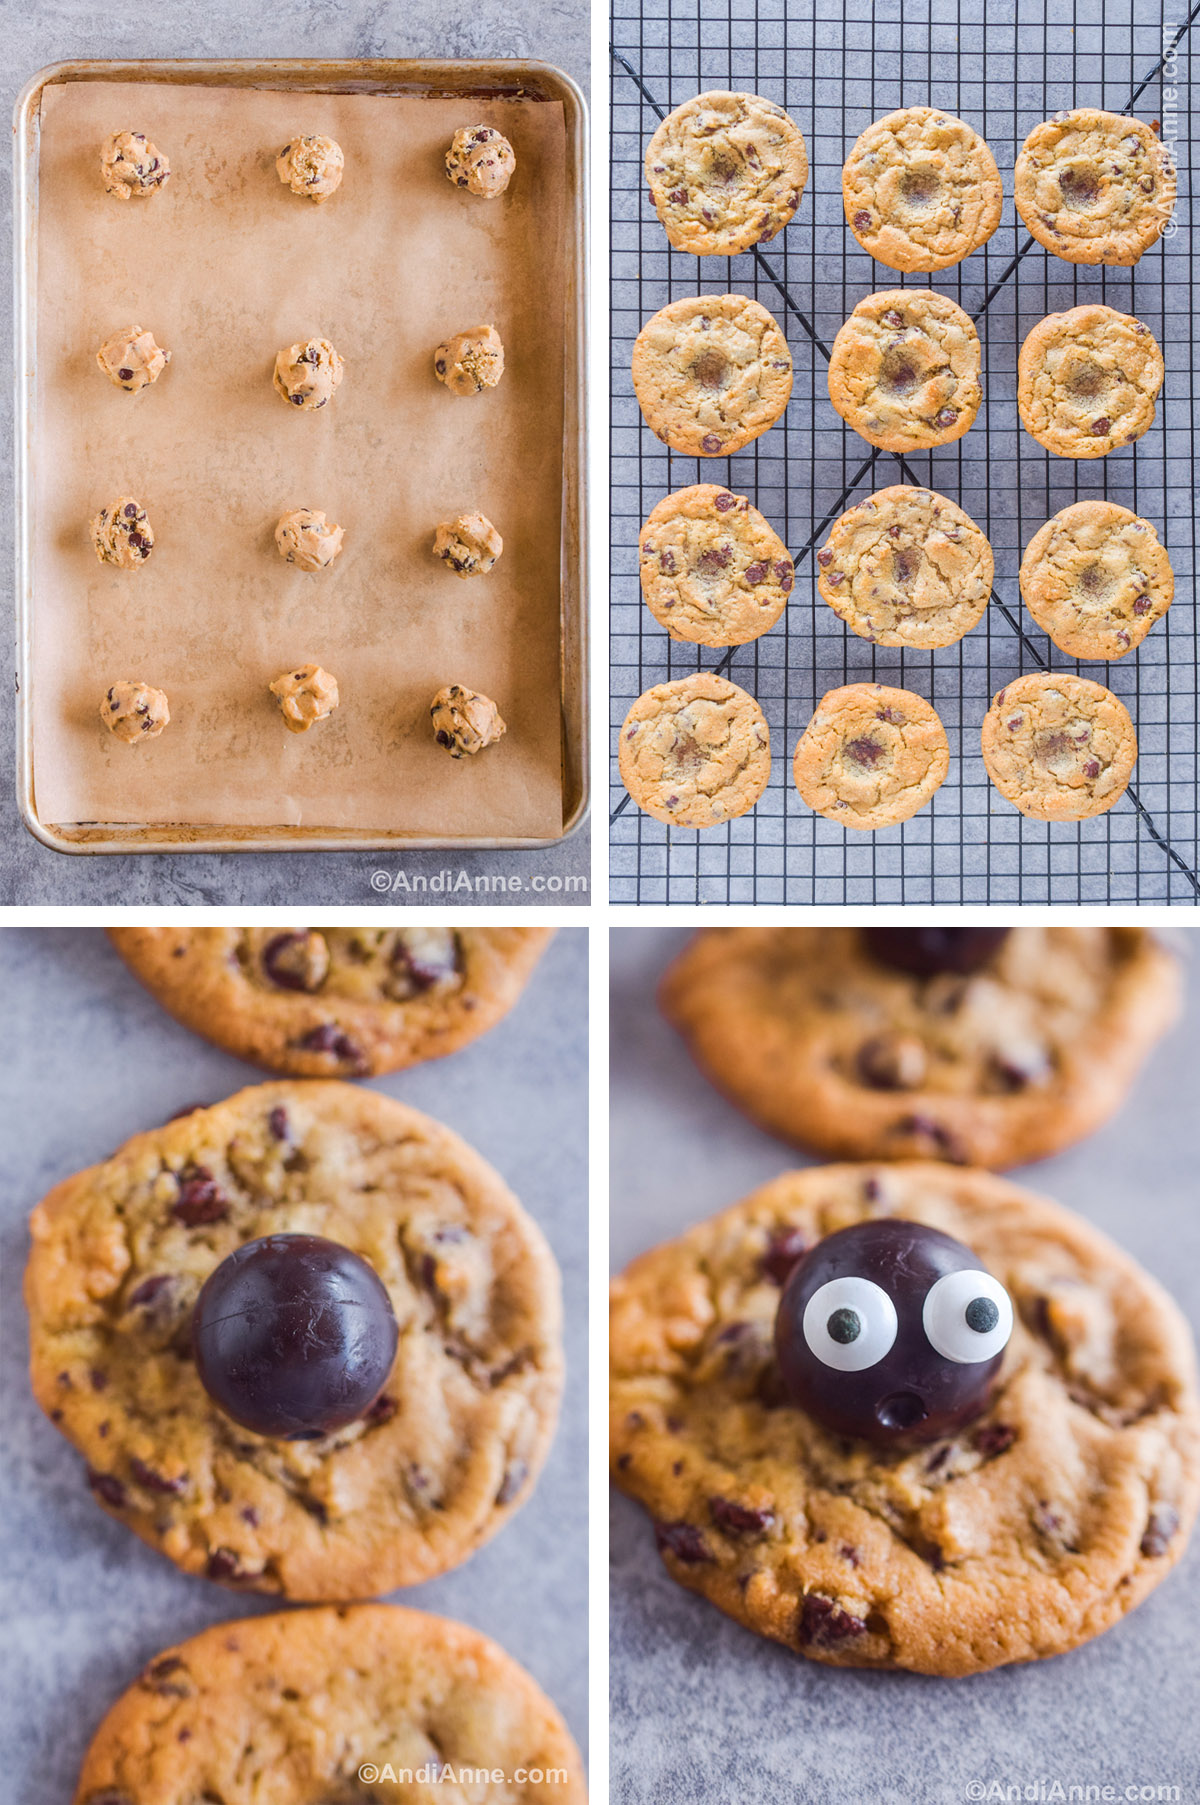 Four images showing steps to make the recipe. First is cookie dough balls on a baking sheet. Second is baked cookies on a rack with indents in the middle of each. Third is a round chocolate ball in the center of a cookie. Fourth has candy eyeballs on the round chocolate ball.